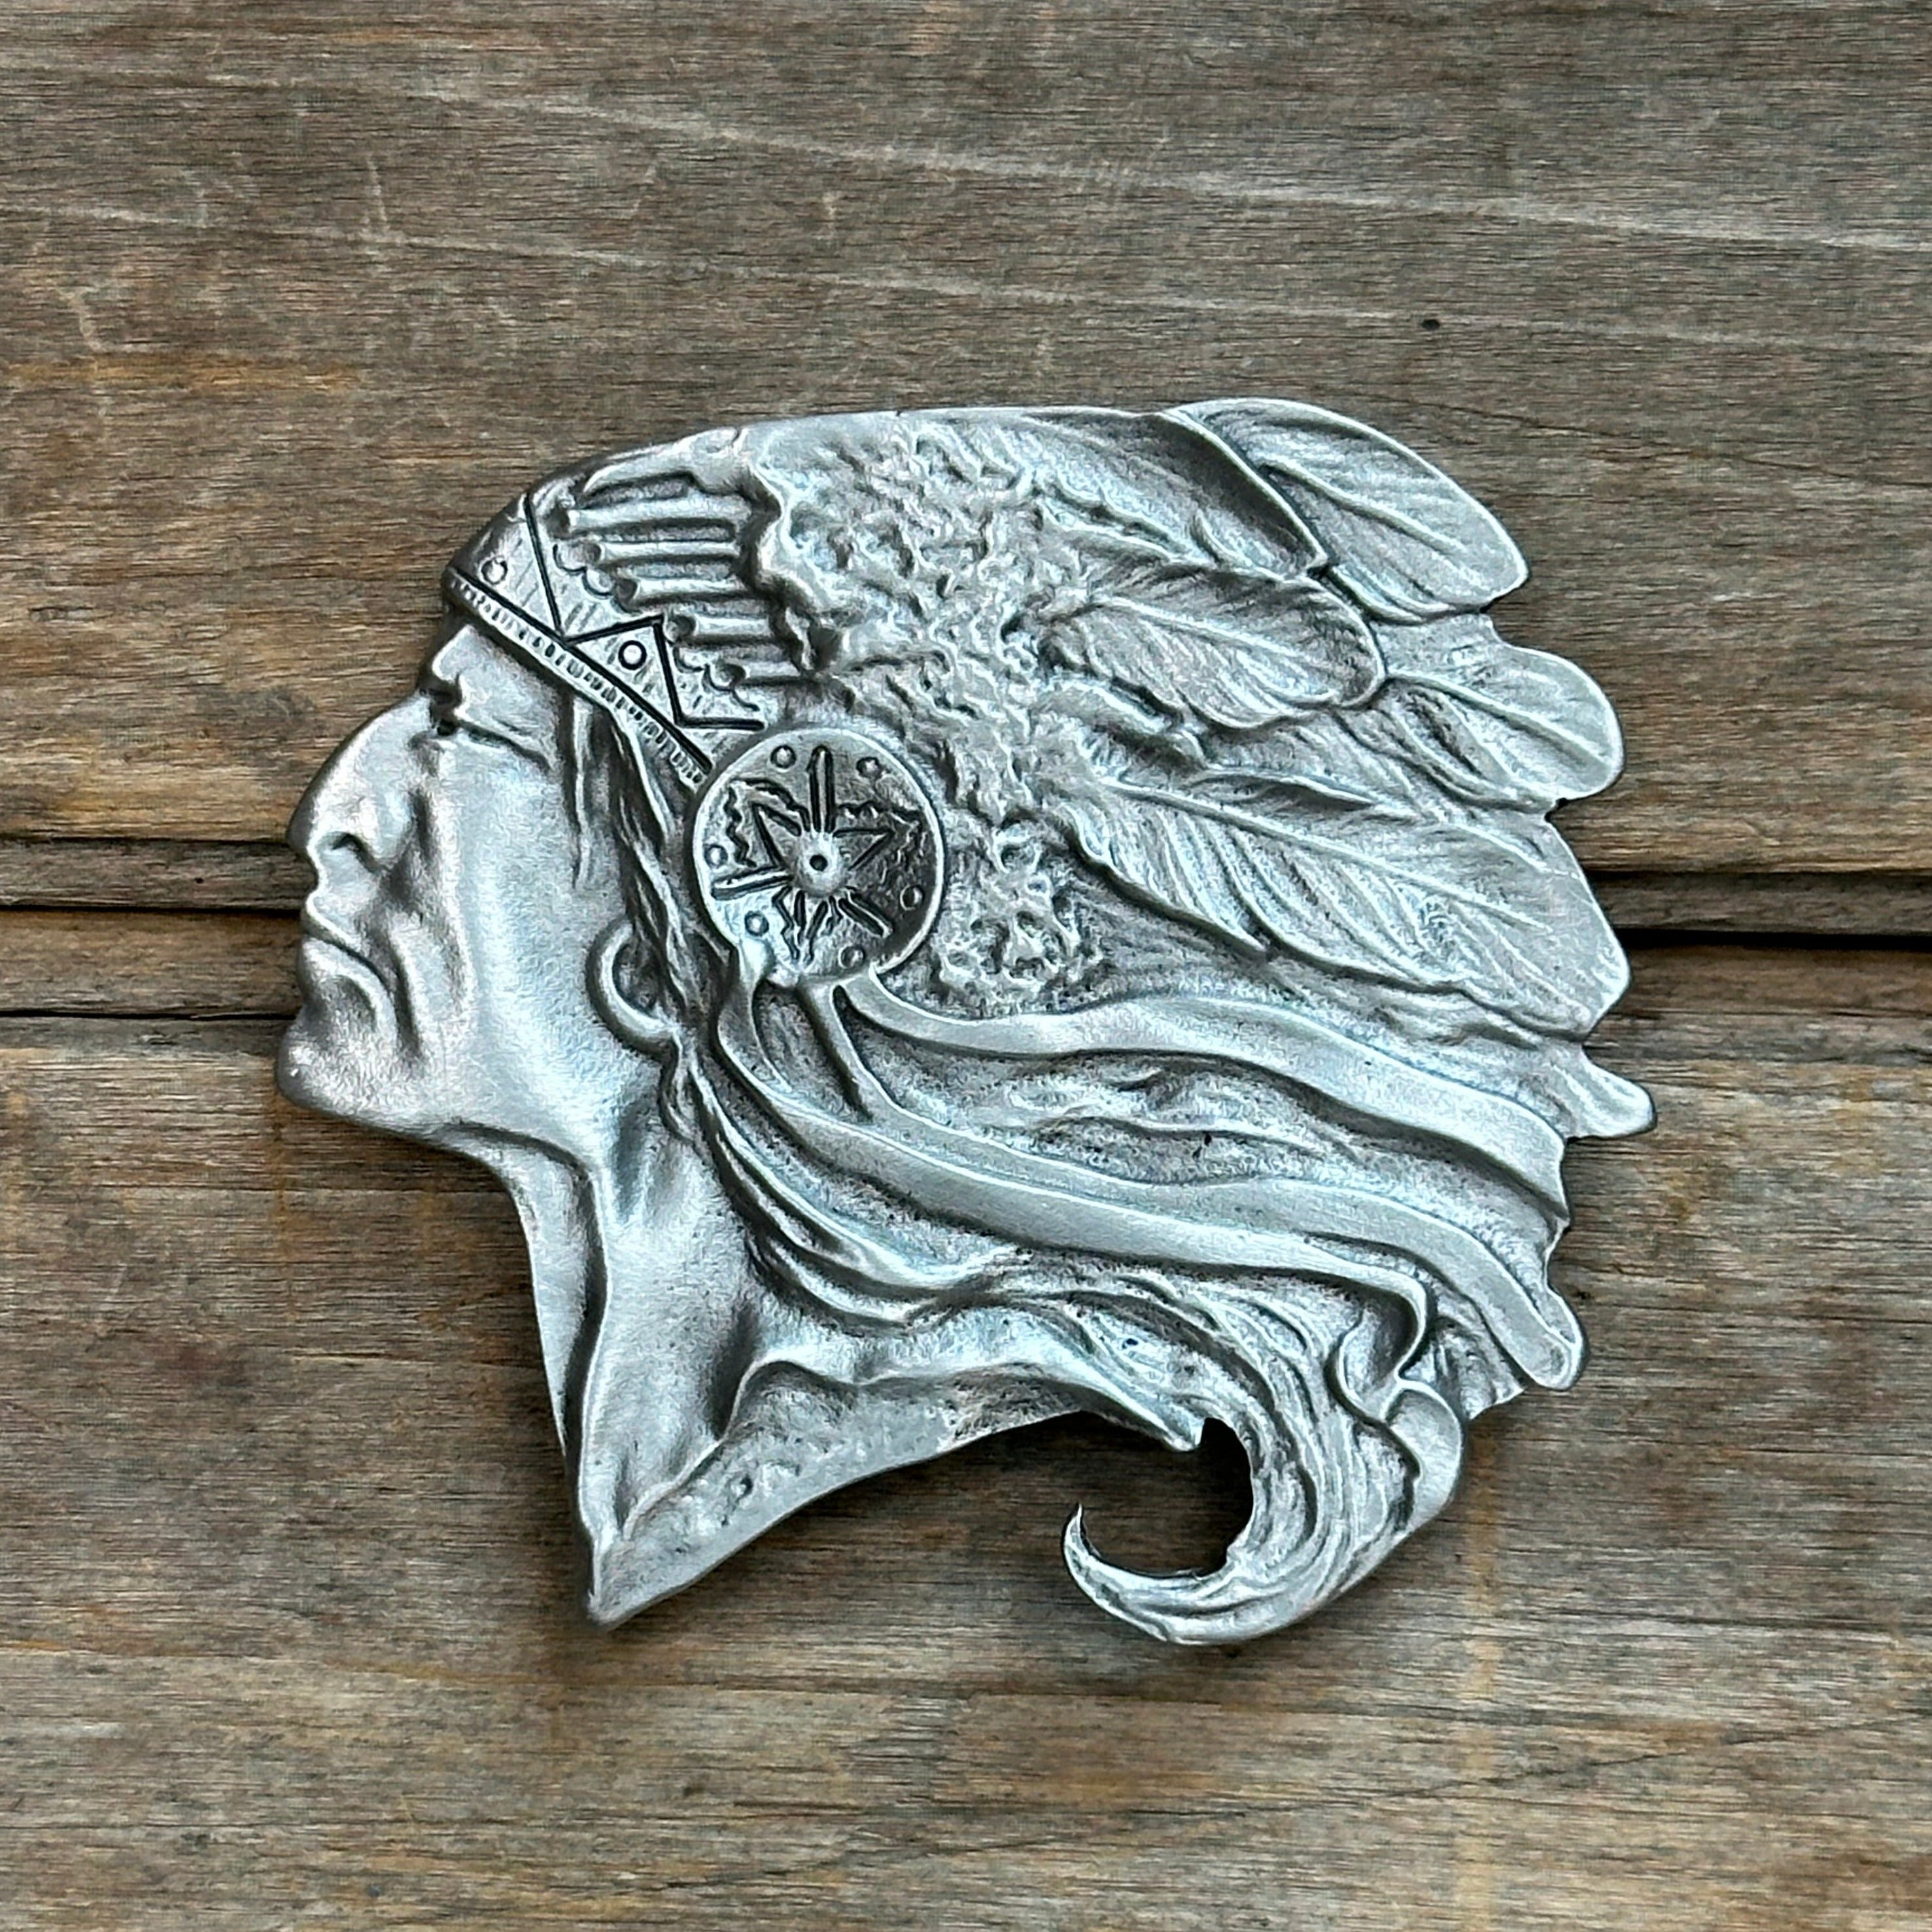 This is a pewter belt buckle with a silver tone.  It depicts a native american cheif pontiac in profile.